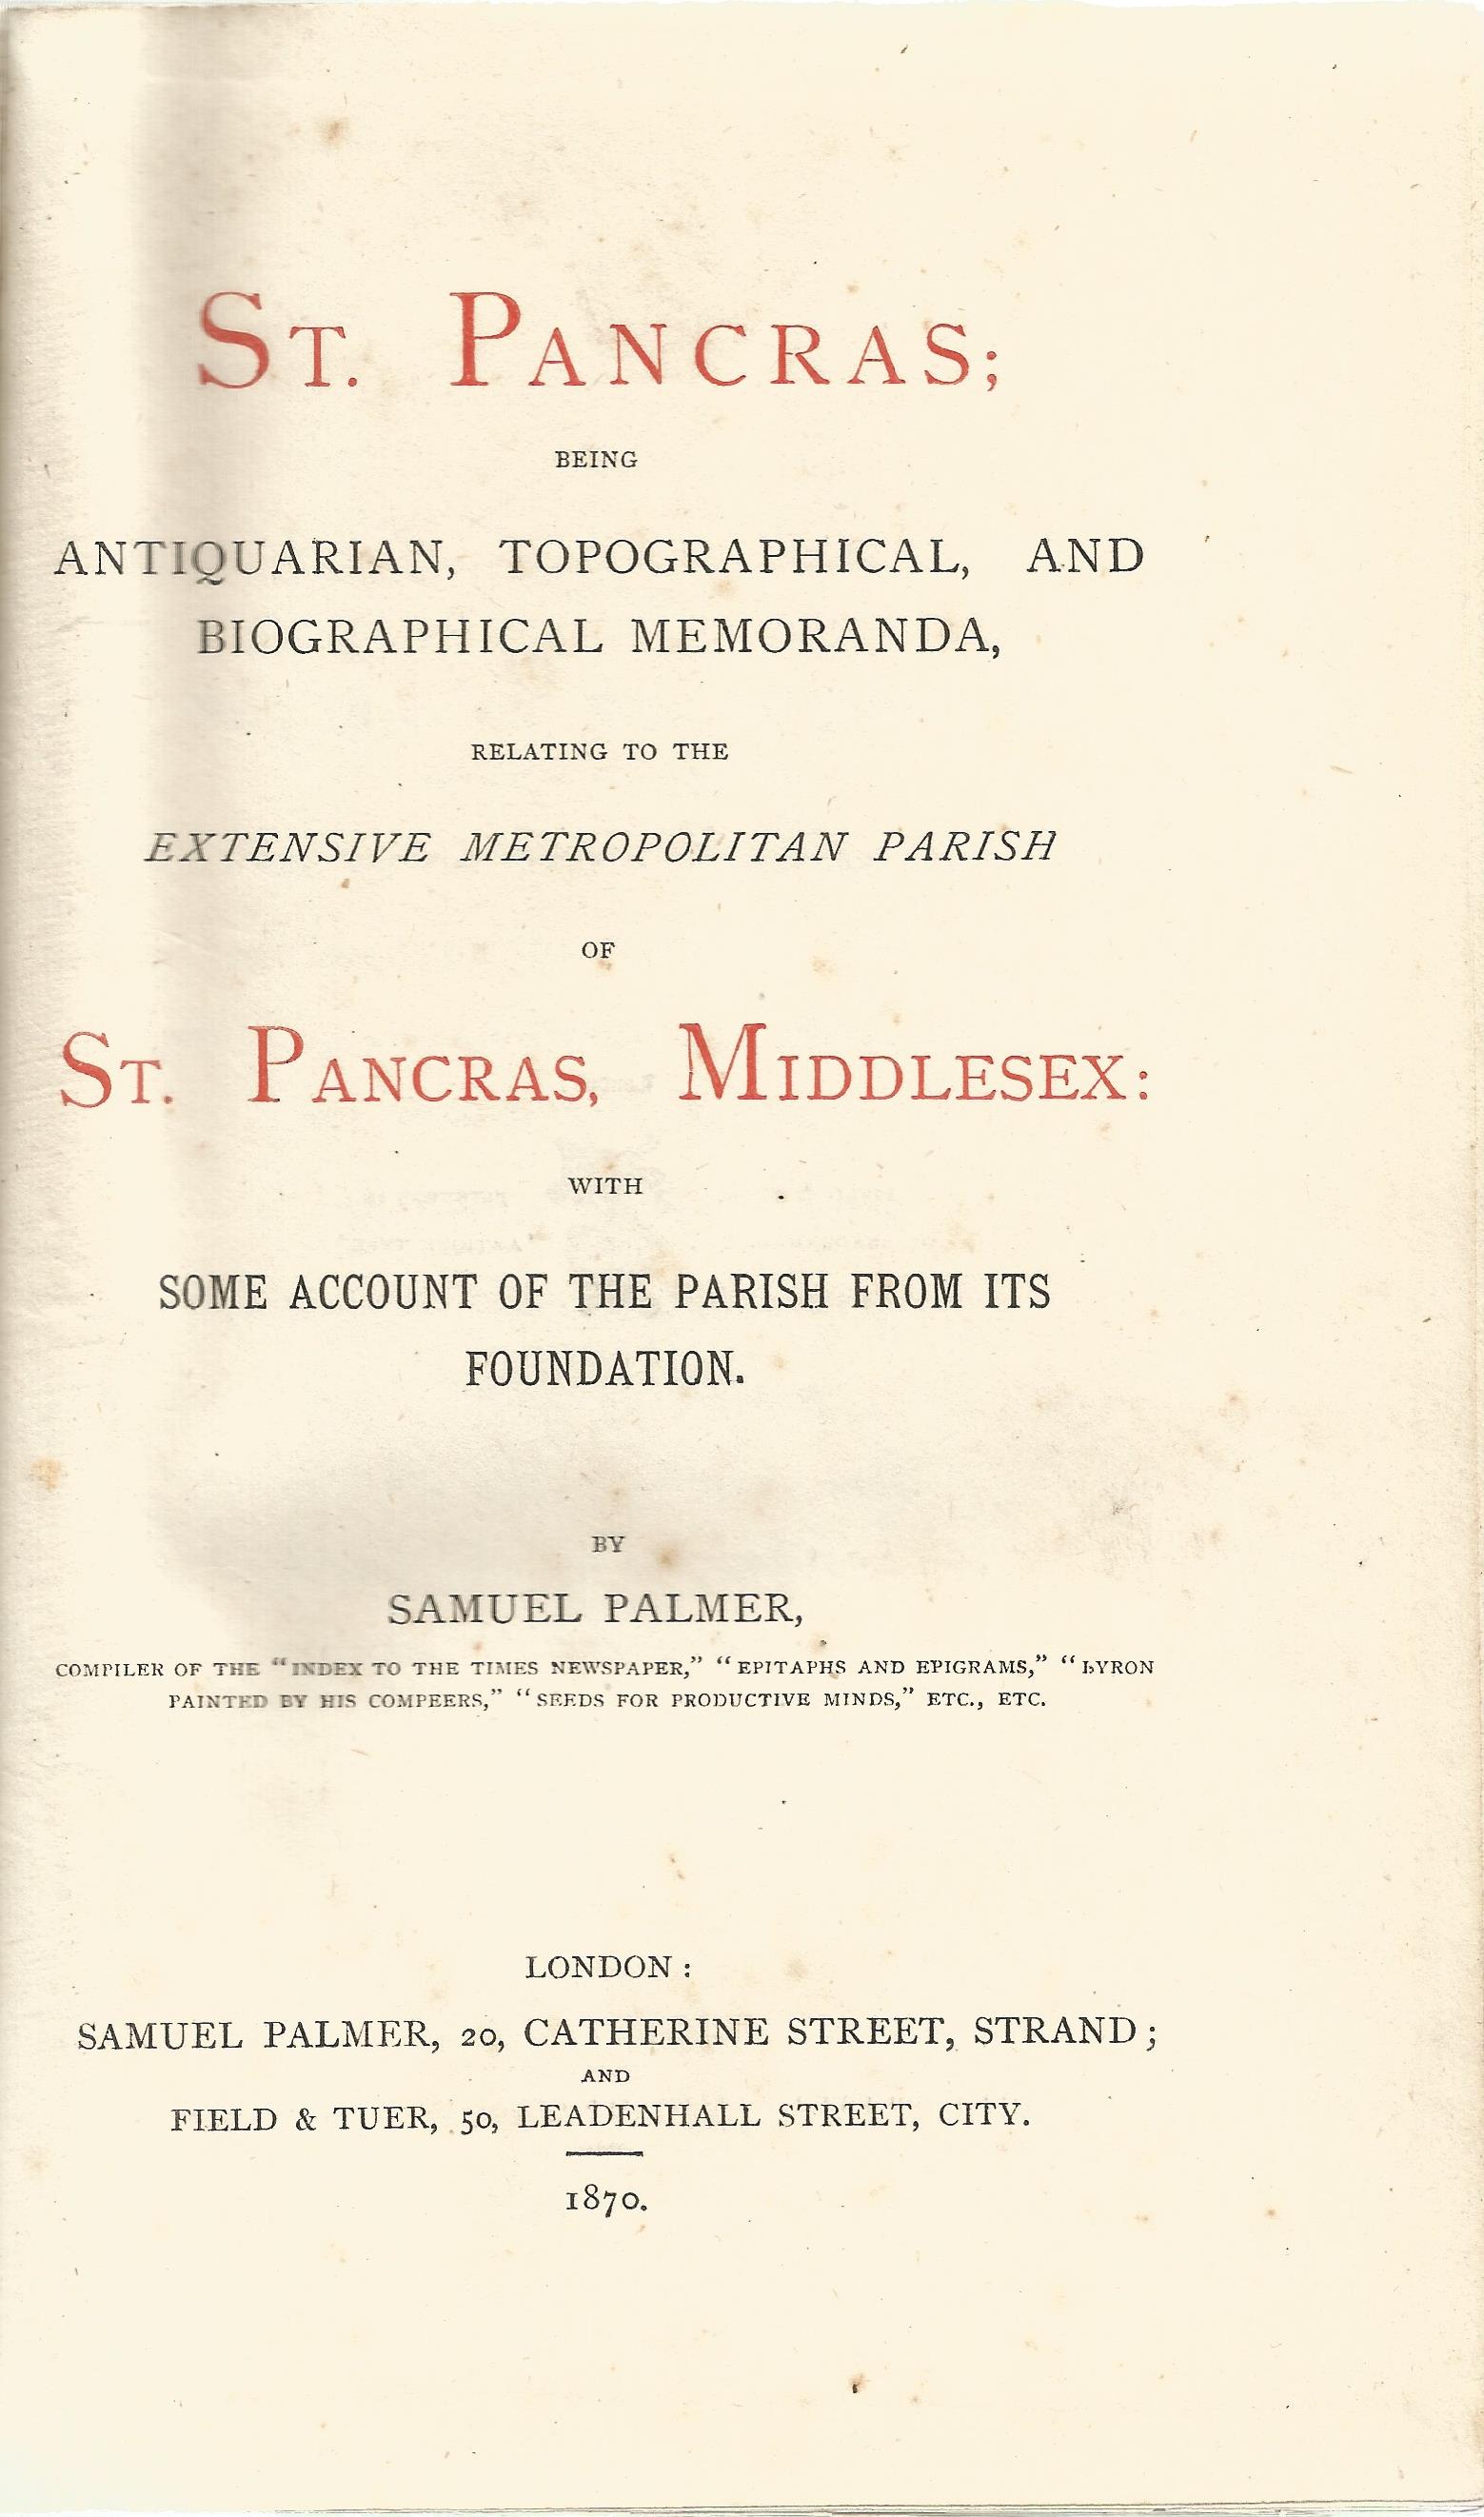 The History of St Pancras Middlesex by Samuel Palmer Hardback Book 1870 First Edition published by - Image 2 of 3